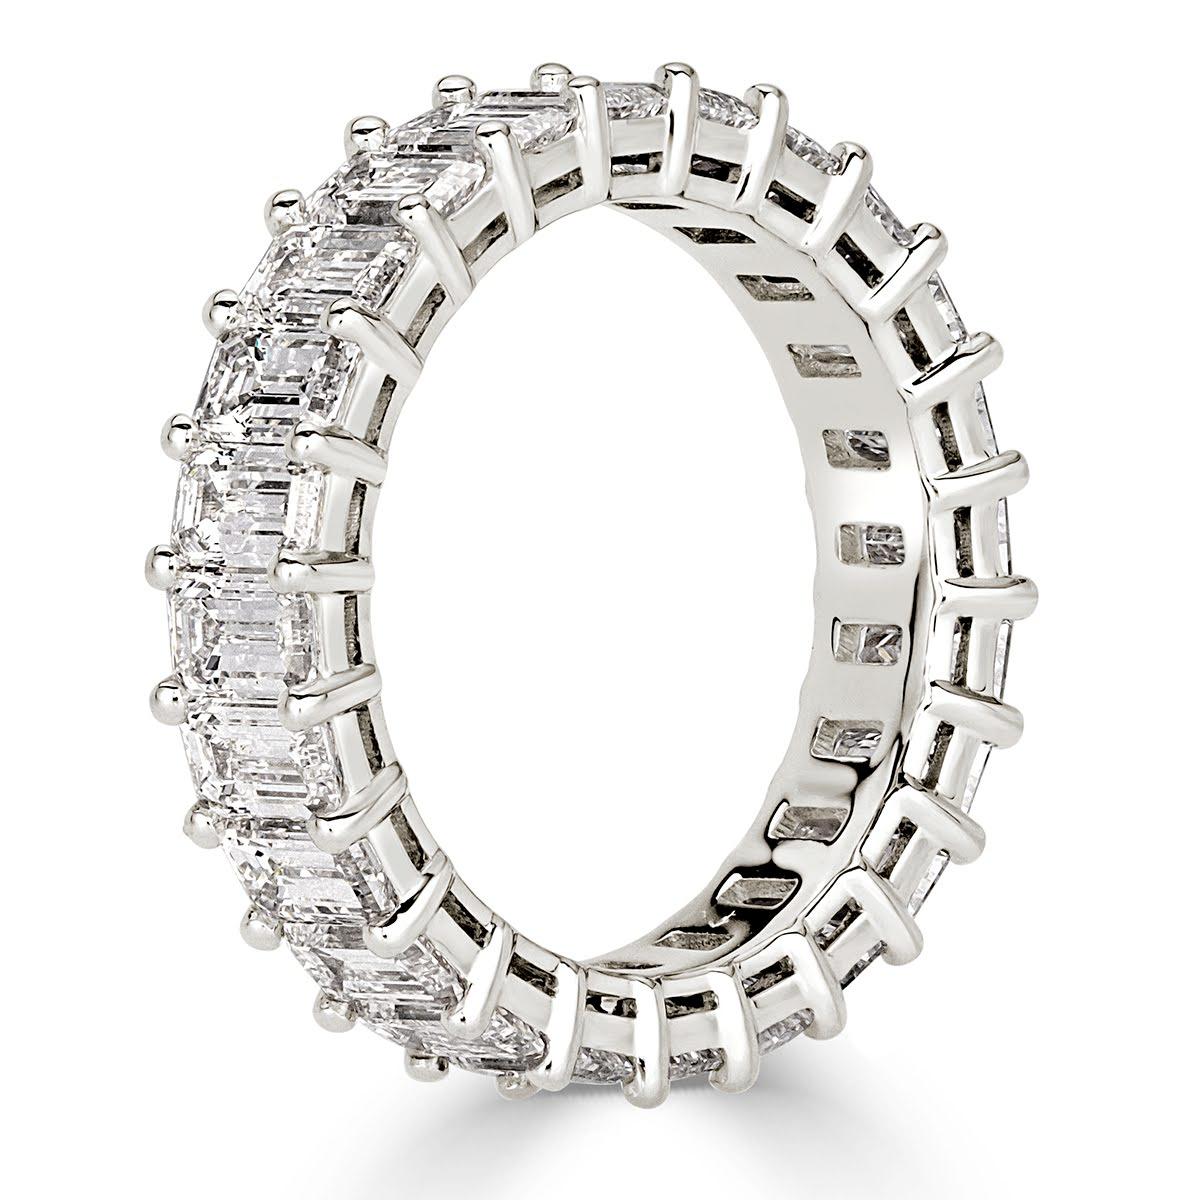 Handcrafted in high polish platinum, this gorgeous diamond eternity band is truly stunning from every angles! It features 4.87ct of perfectly matched emerald cut diamonds graded at E-F, VVS2-VS1. All eternity bands are shown in a size 6.5. We custom